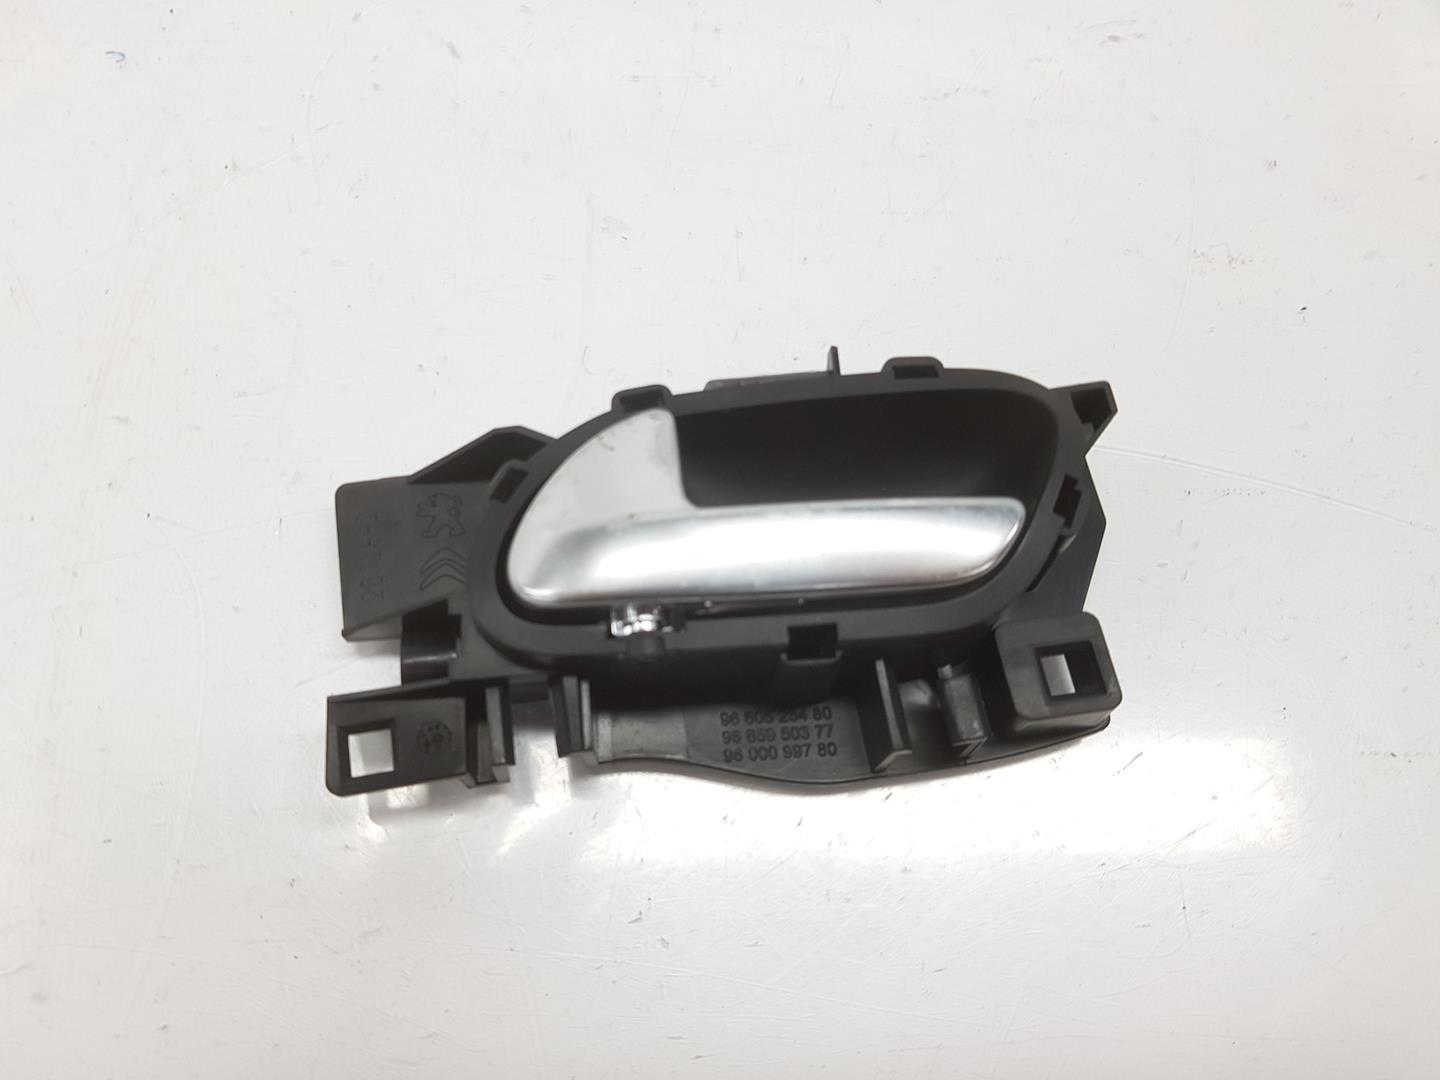 CITROËN C4 Picasso 2 generation (2013-2018) Left Rear Internal Opening Handle 9143T8, 9143T8 24193836